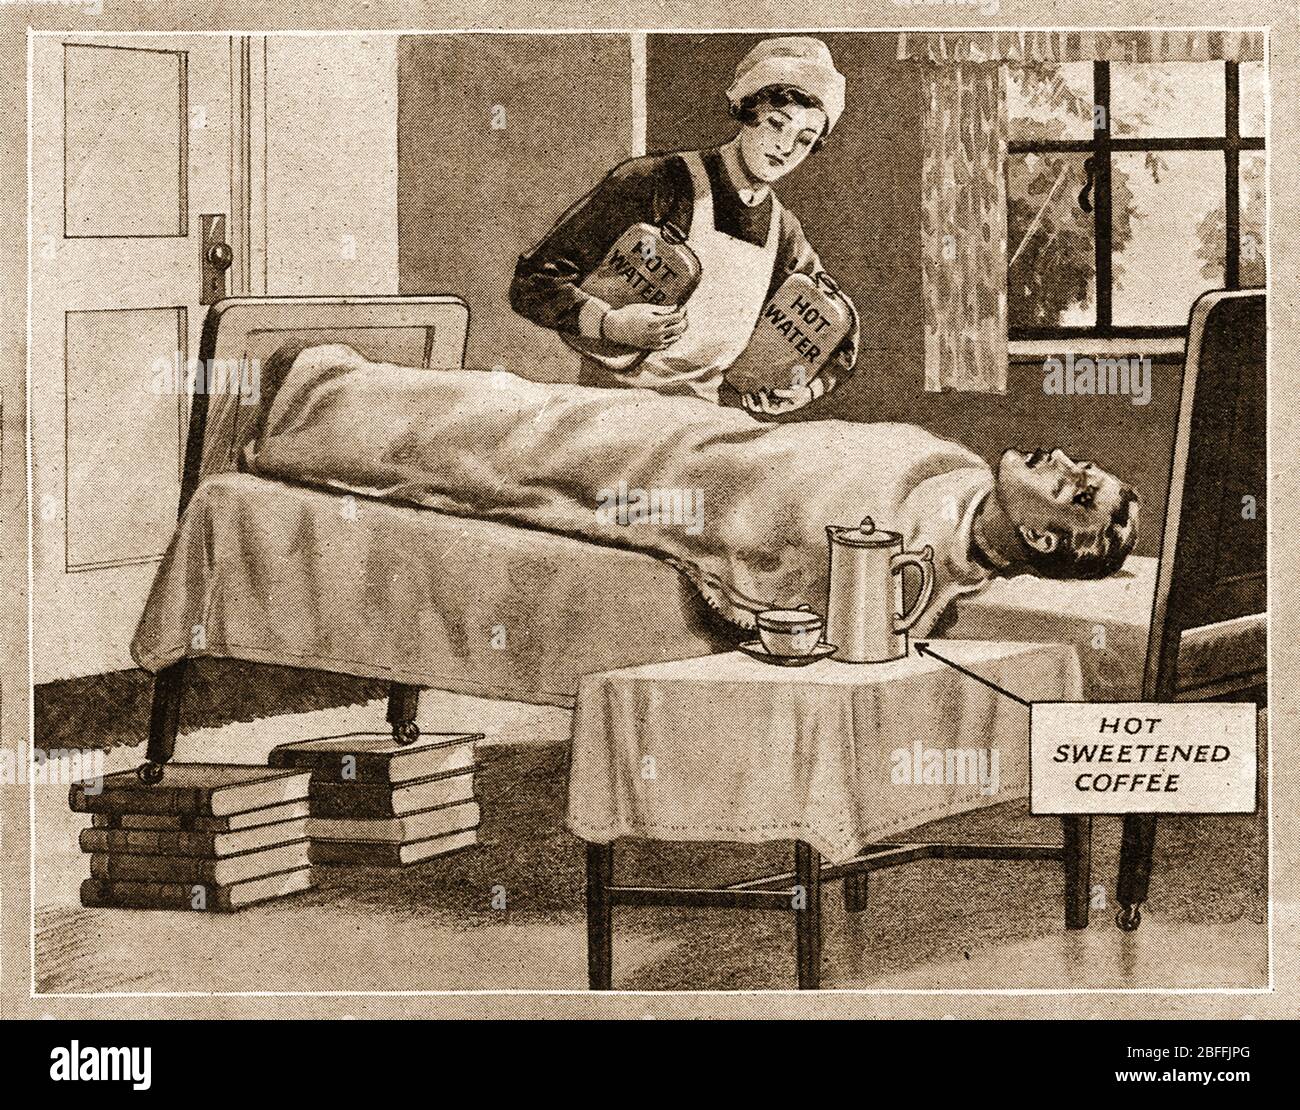 https://c8.alamy.com/comp/2BFFJPG/a-1940s-illustration-showing-how-to-treat-a-patient-for-shock-using-hot-water-bottles-coffee-and-raising-the-the-bed-at-one-end-with-books-2BFFJPG.jpg